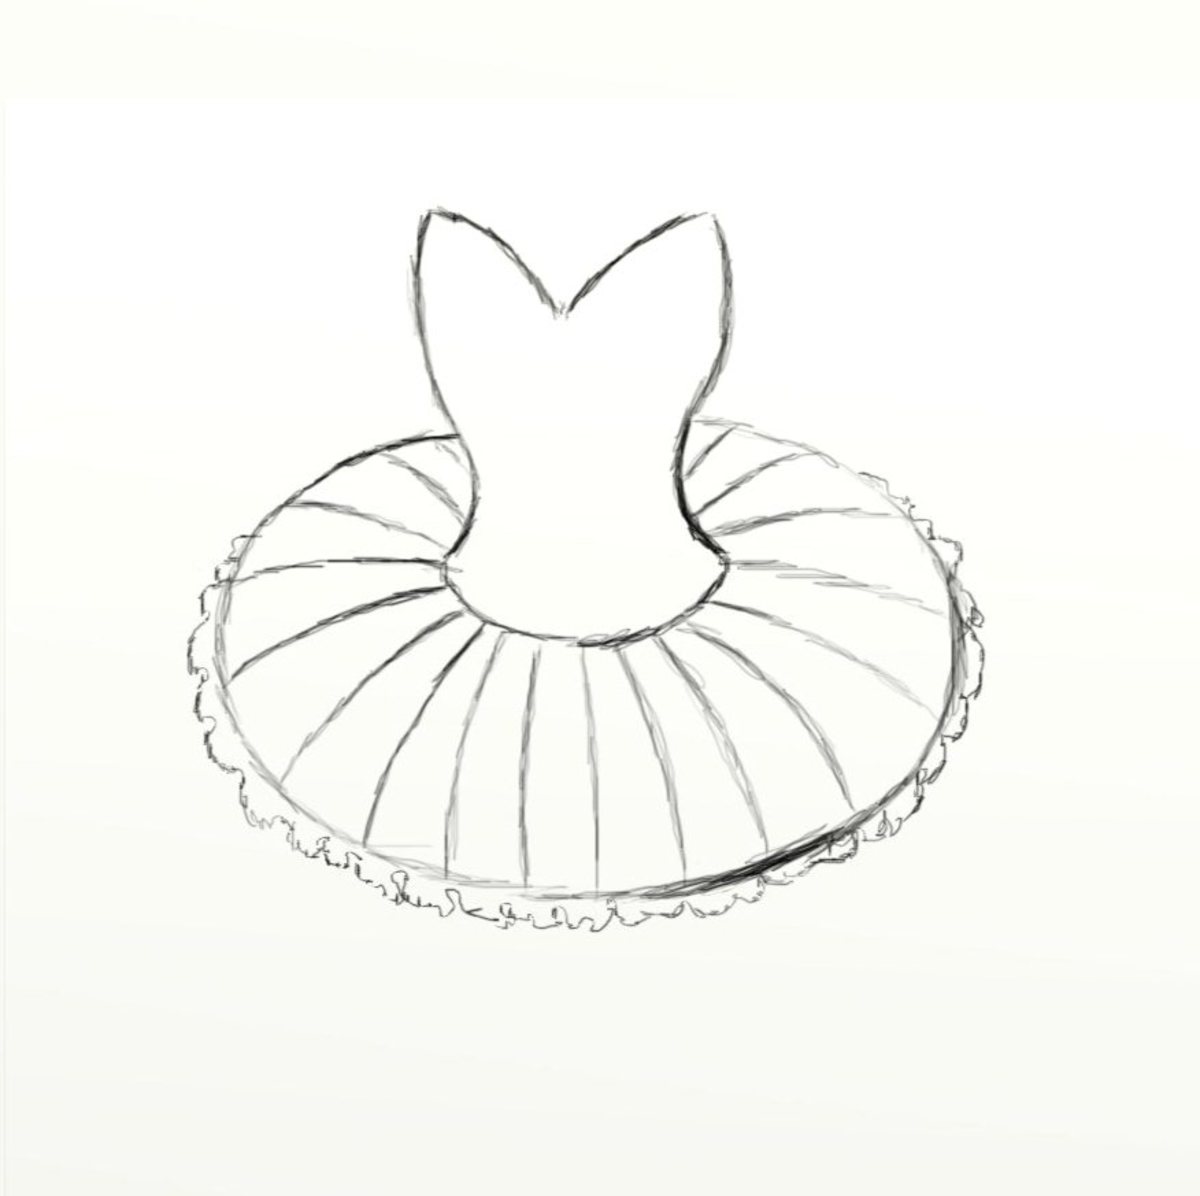 You can add some extra stuff, like lace, at the bottom of the tutu. 